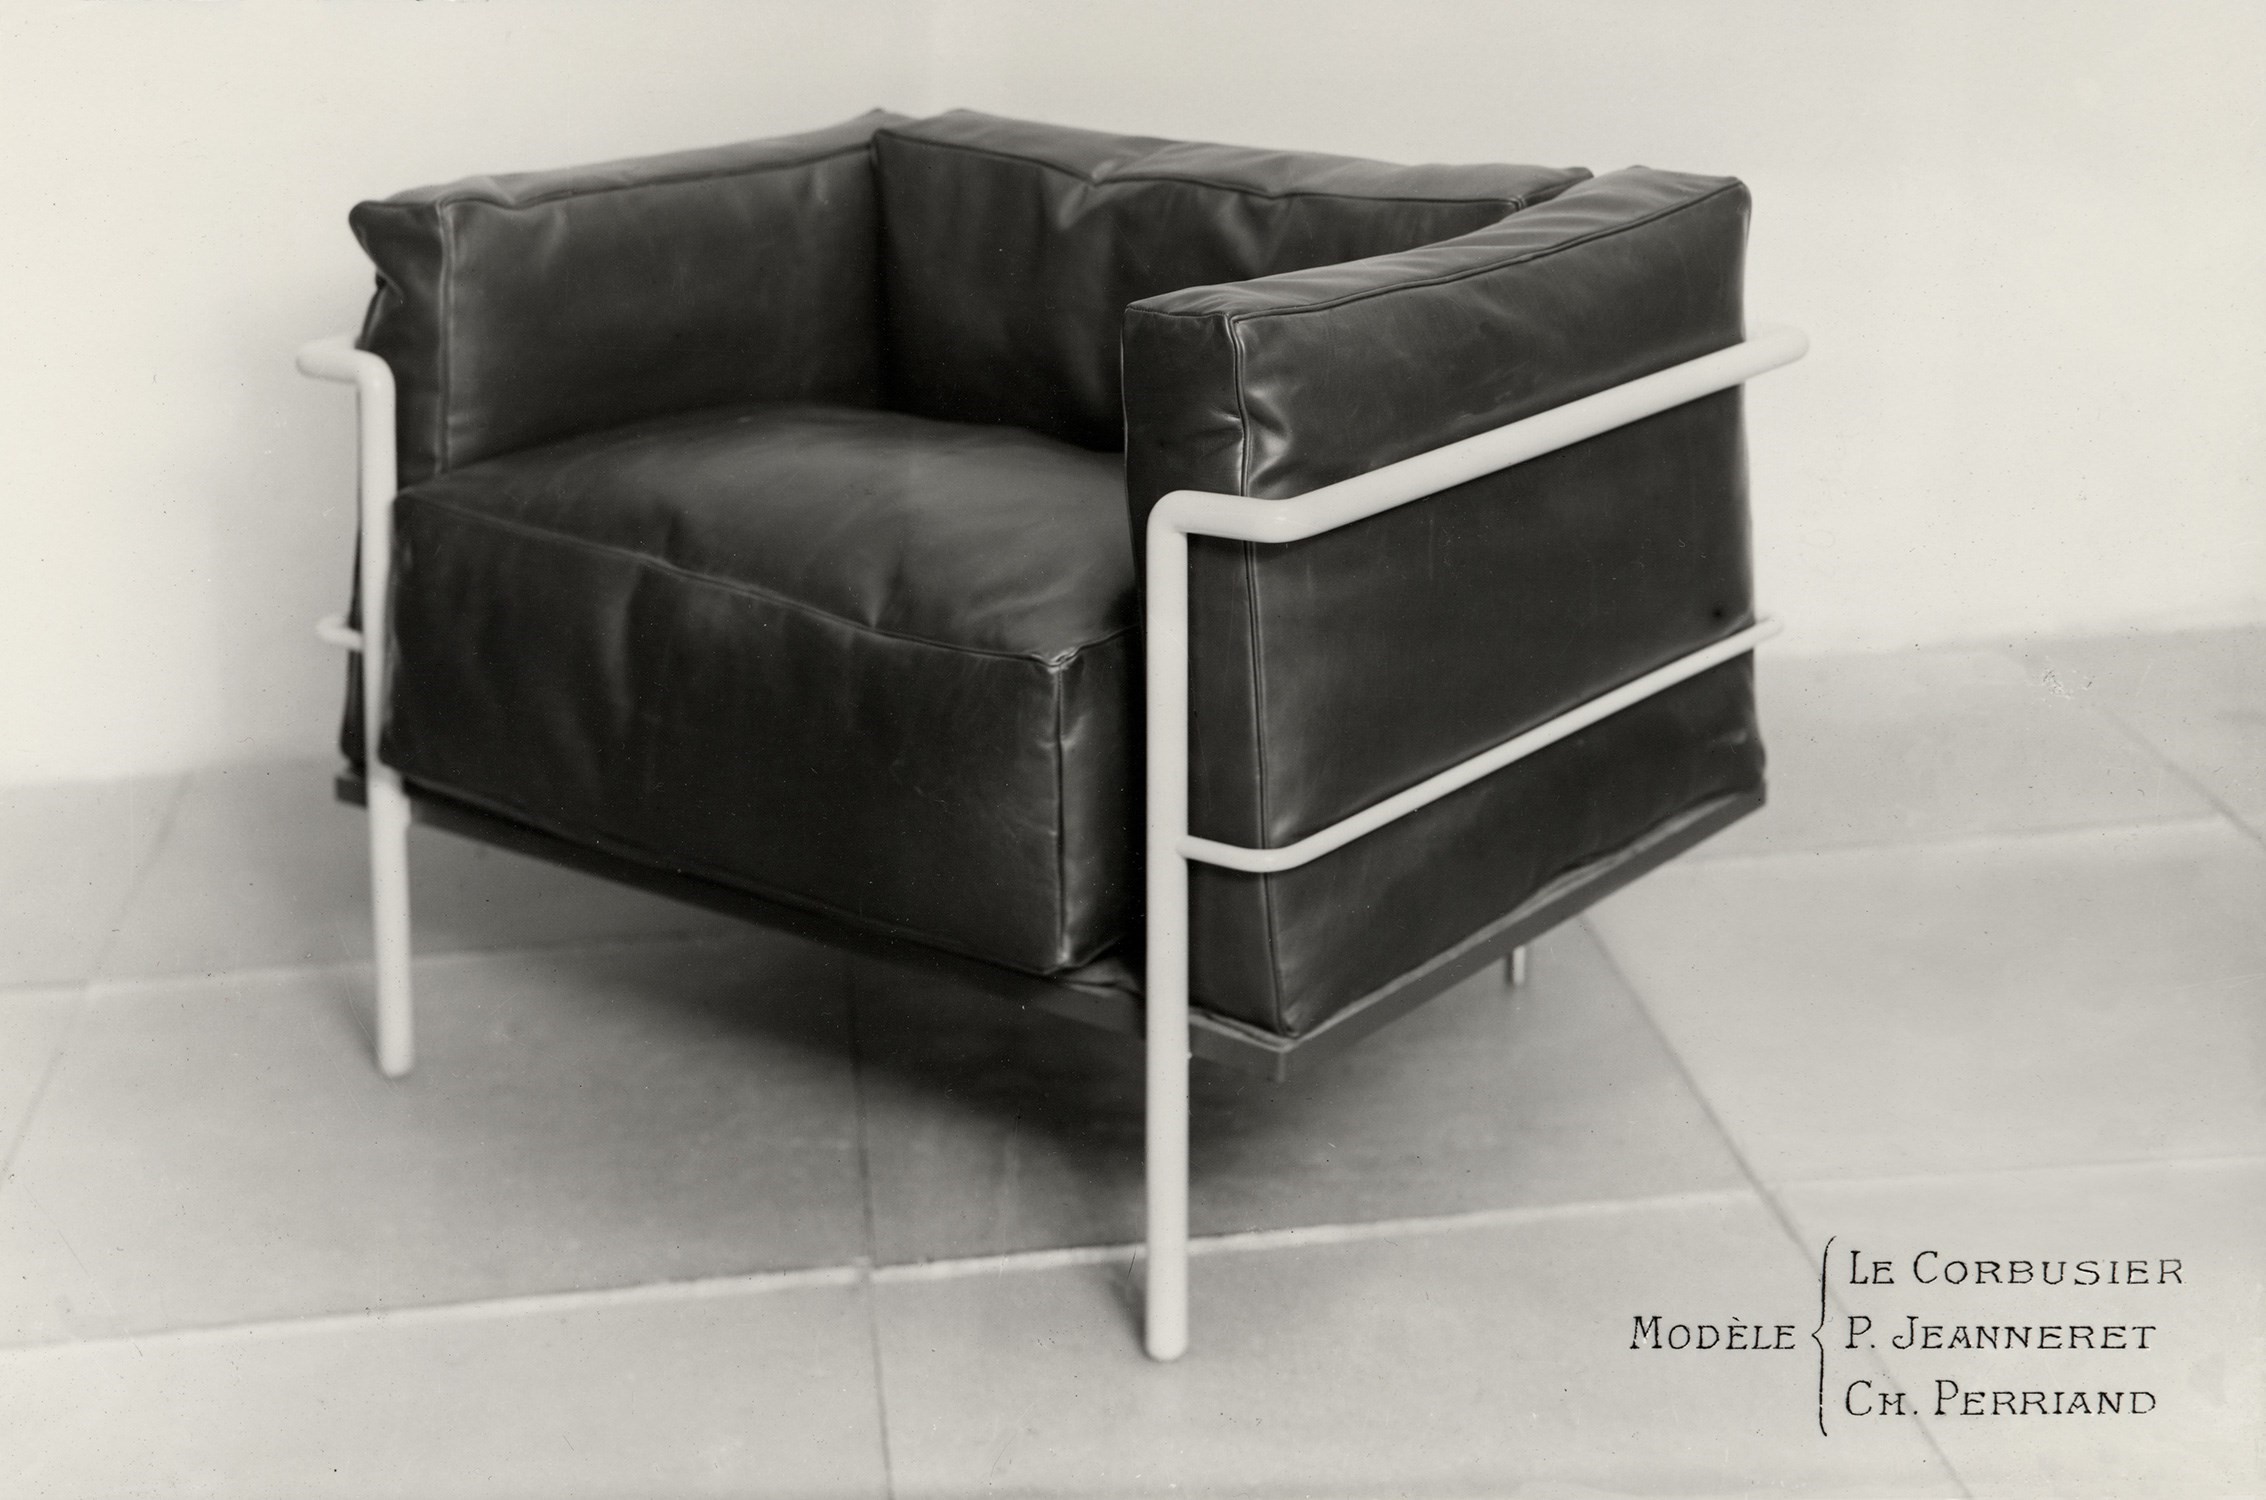 Charlotte Perriand Furniture: The Life and Work of an Iconic Designer -  Invaluable